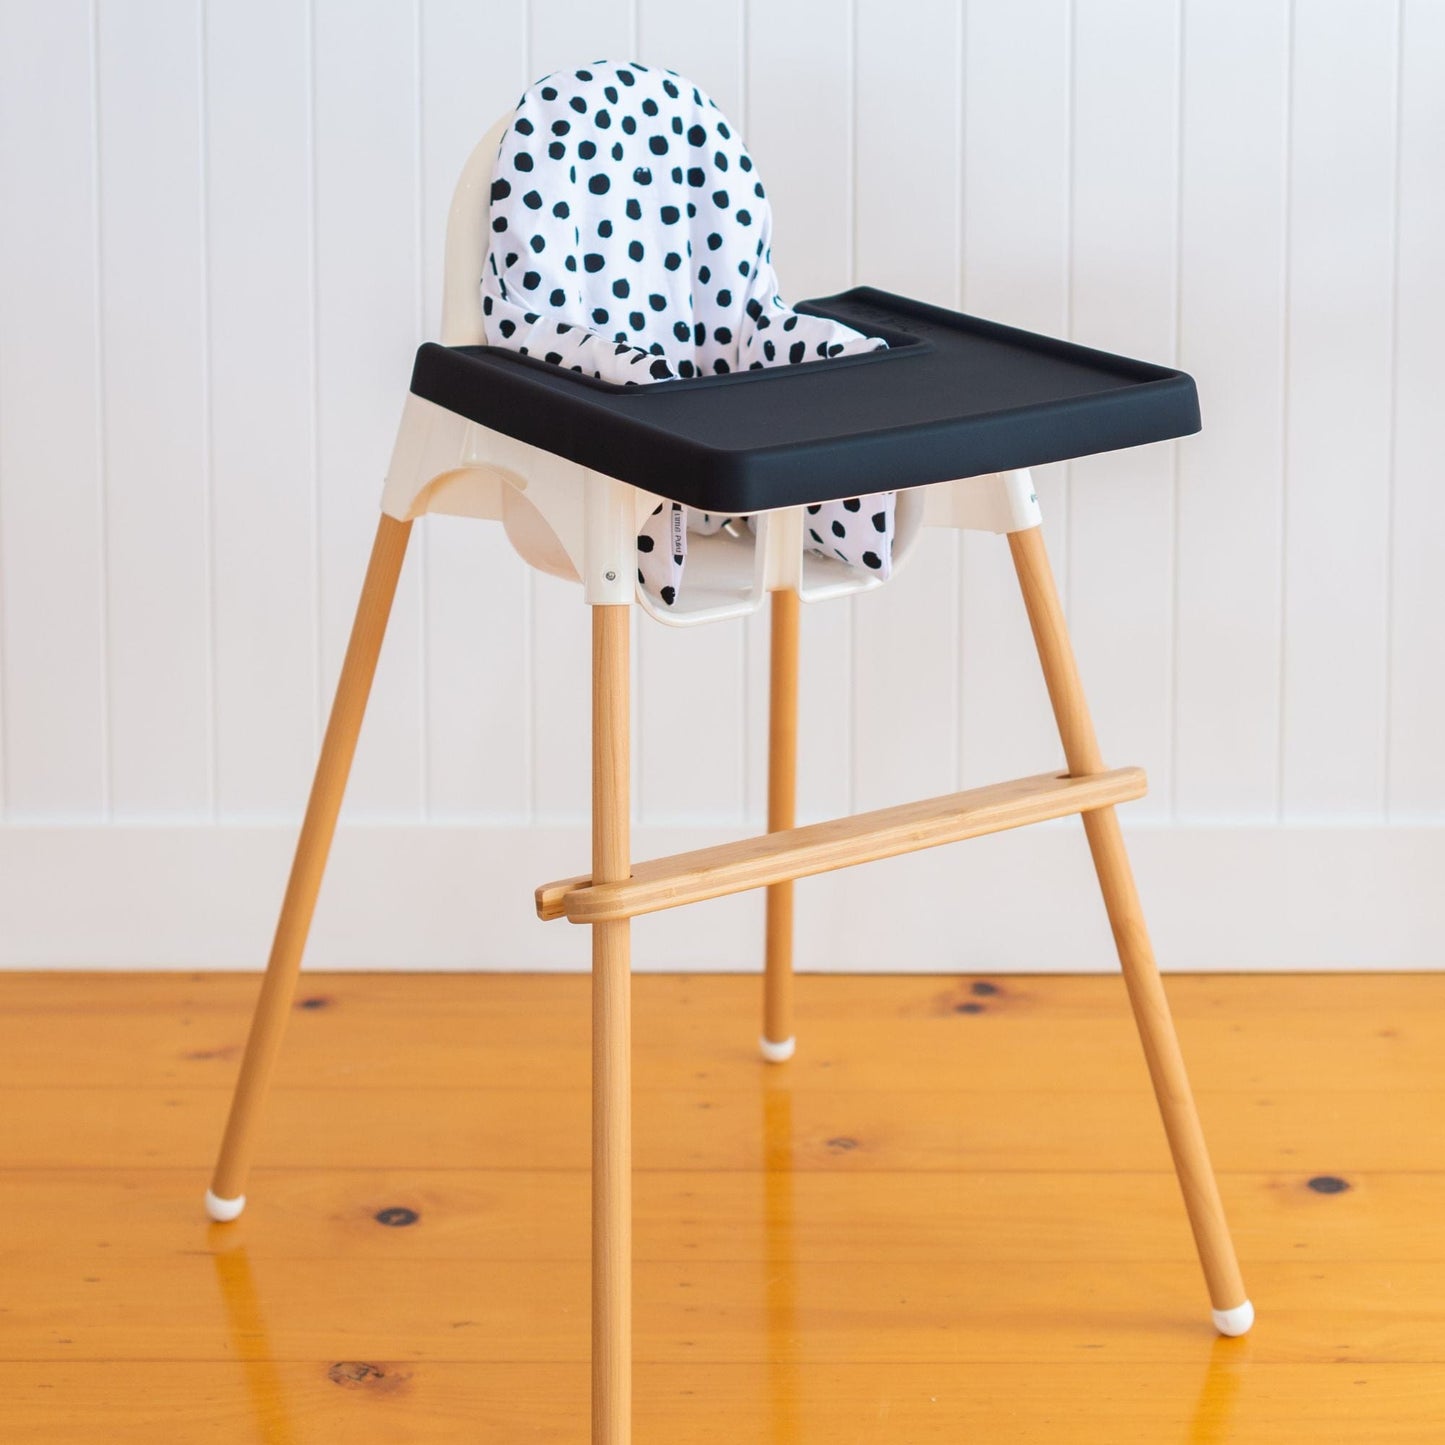 Load image into Gallery viewer, Little Puku IKEA Highchair Placemat Midnight Black IKEA Highchair Placemat
